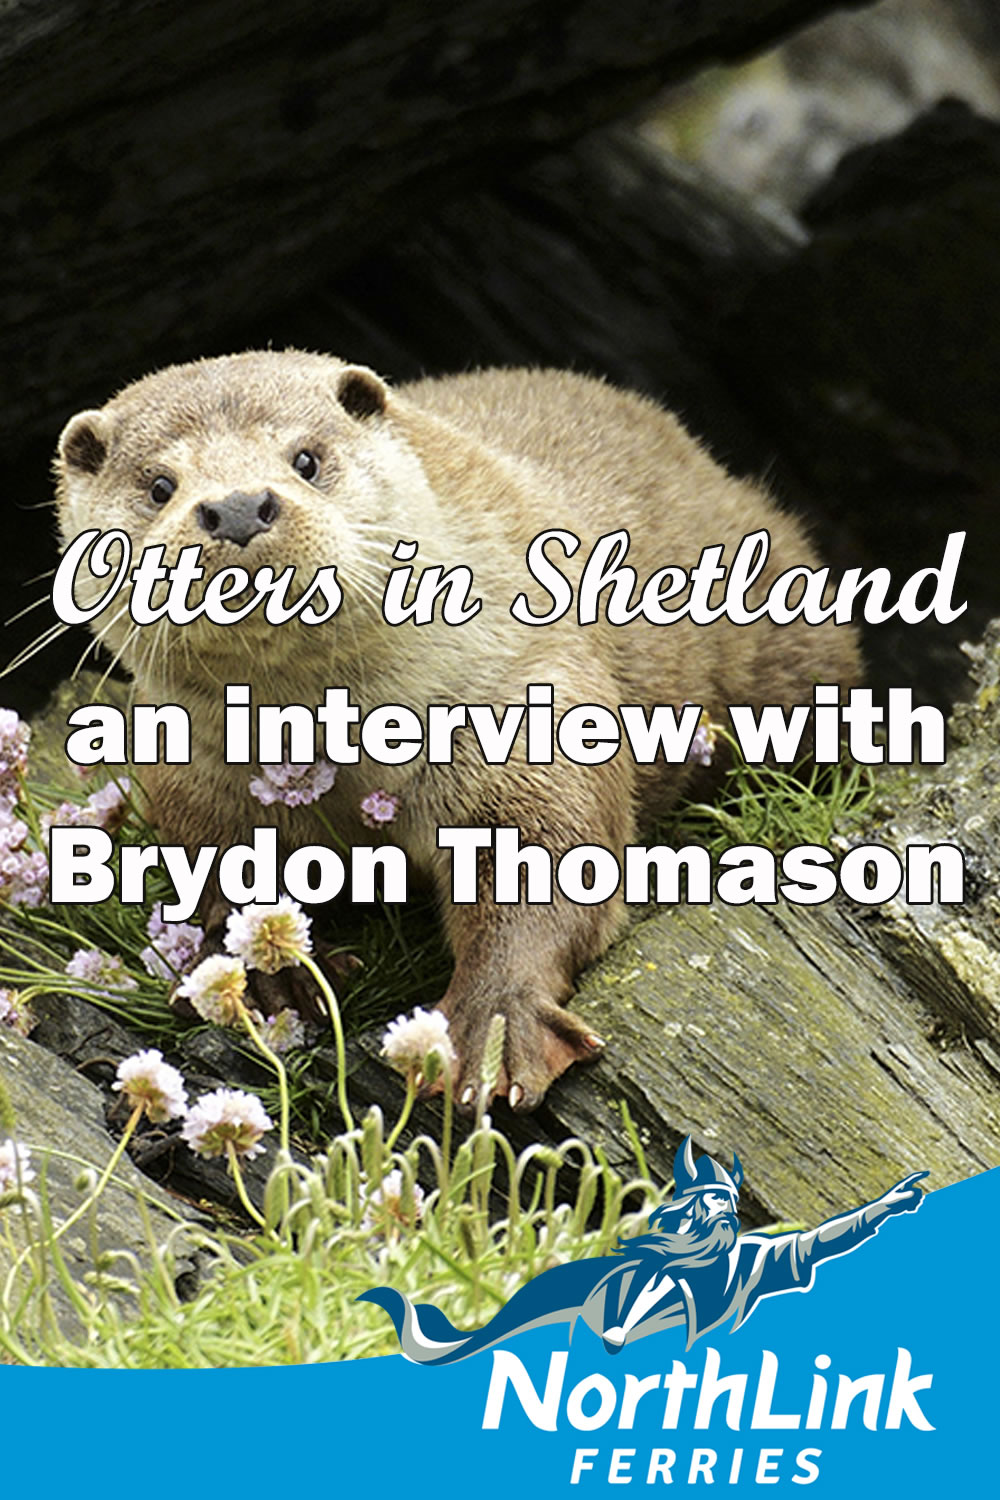 Otters in Shetland – an interview with Brydon Thomason